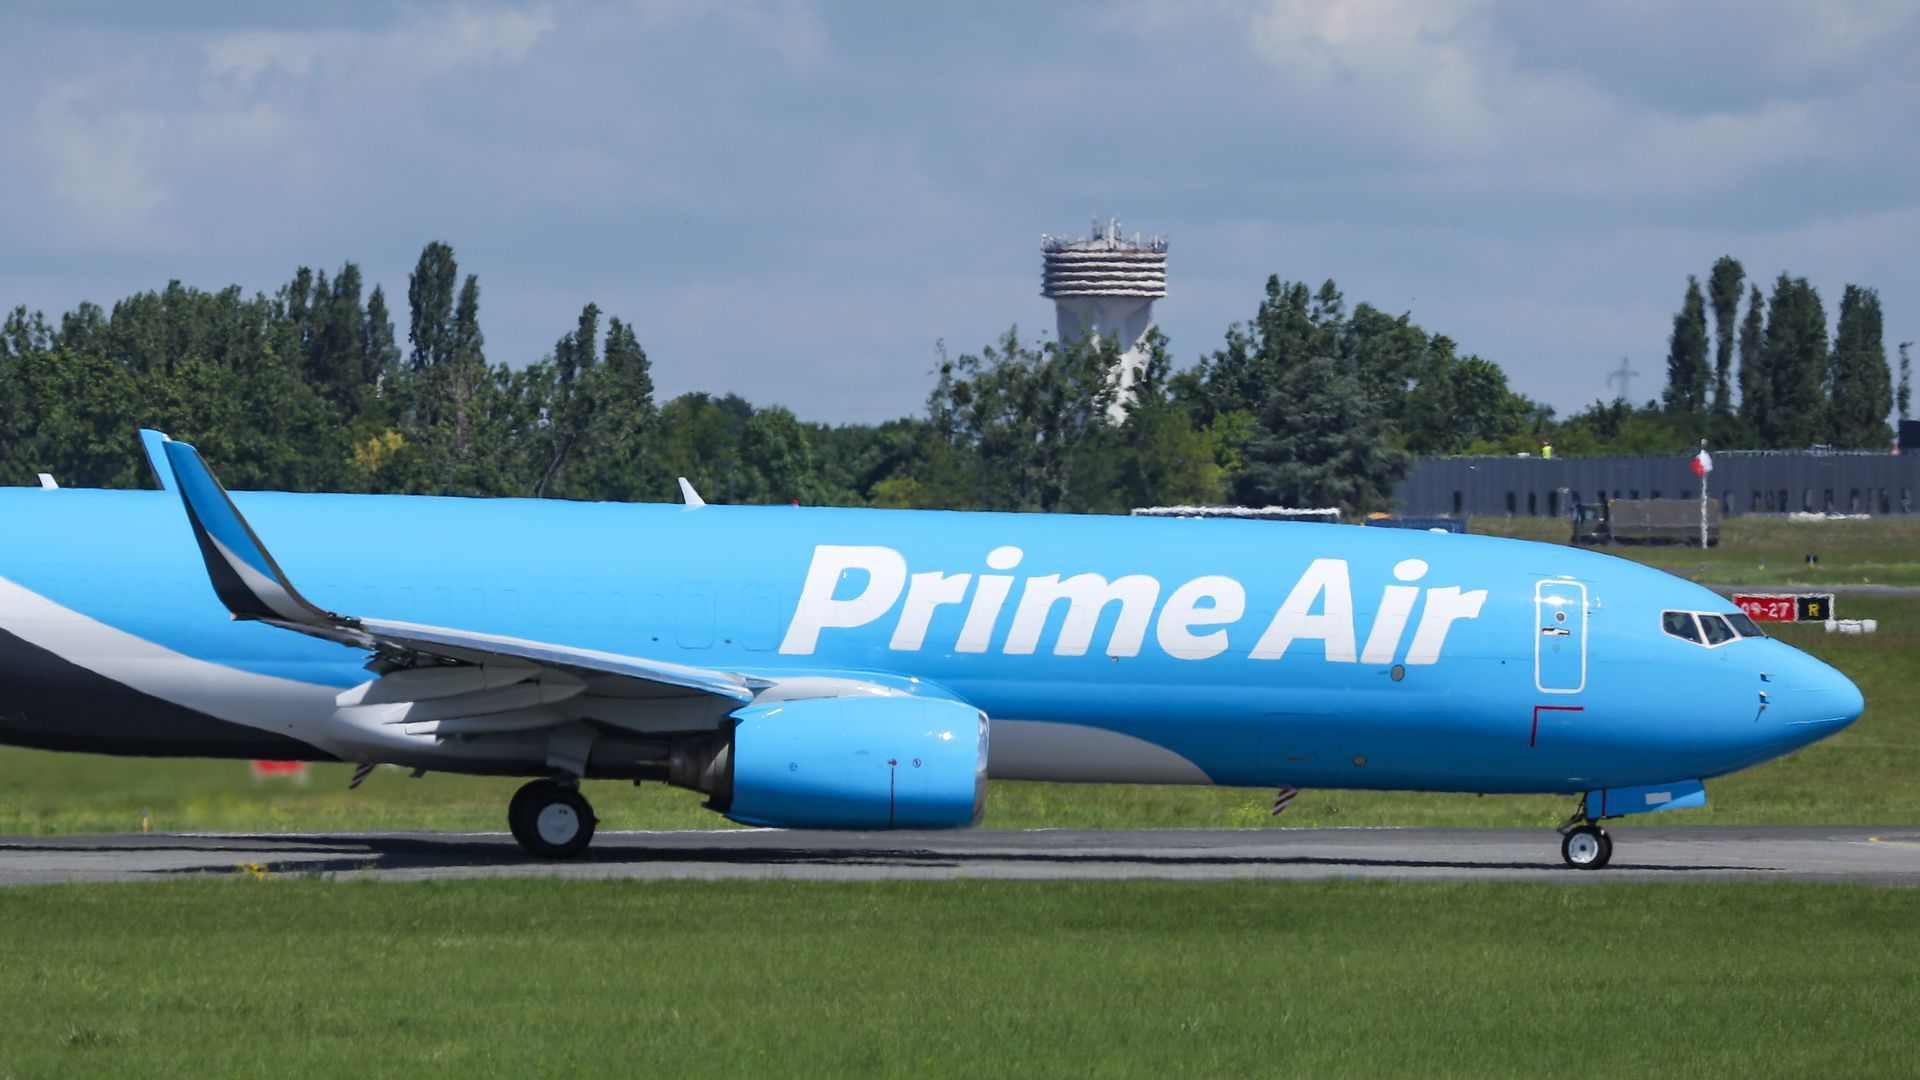 Picture of a bright blue plane with the words "Prime Air" written on the side